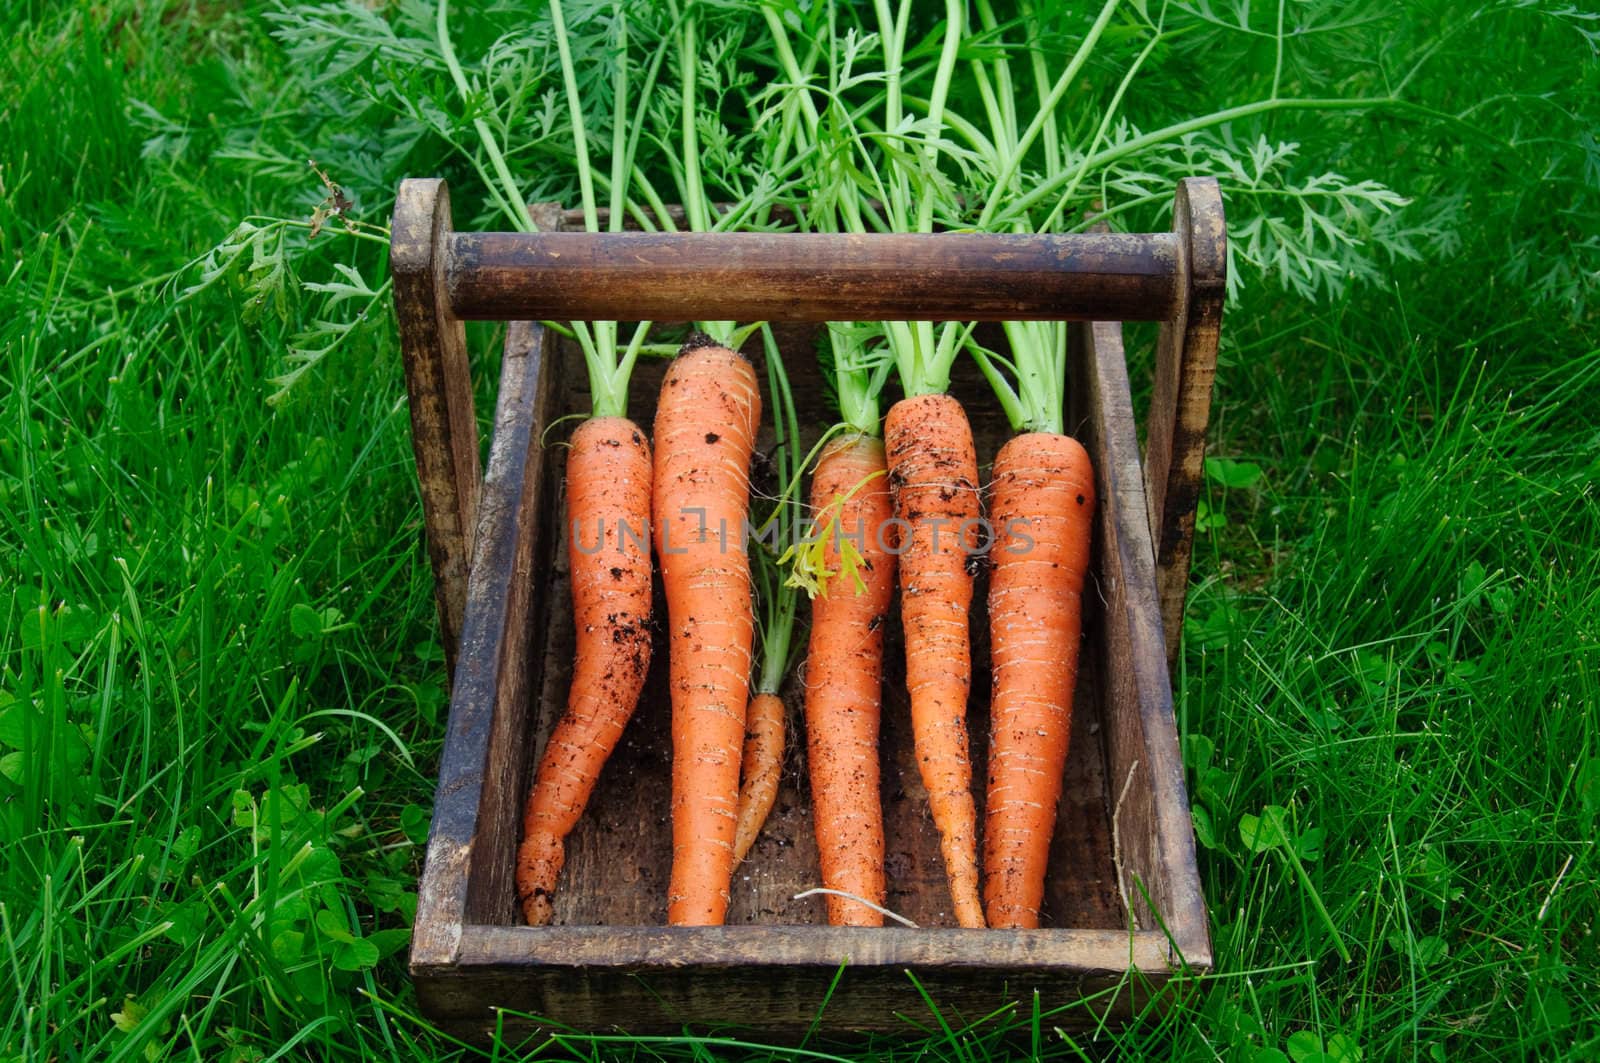 Fresh carrots in a wooden tray placed on grass